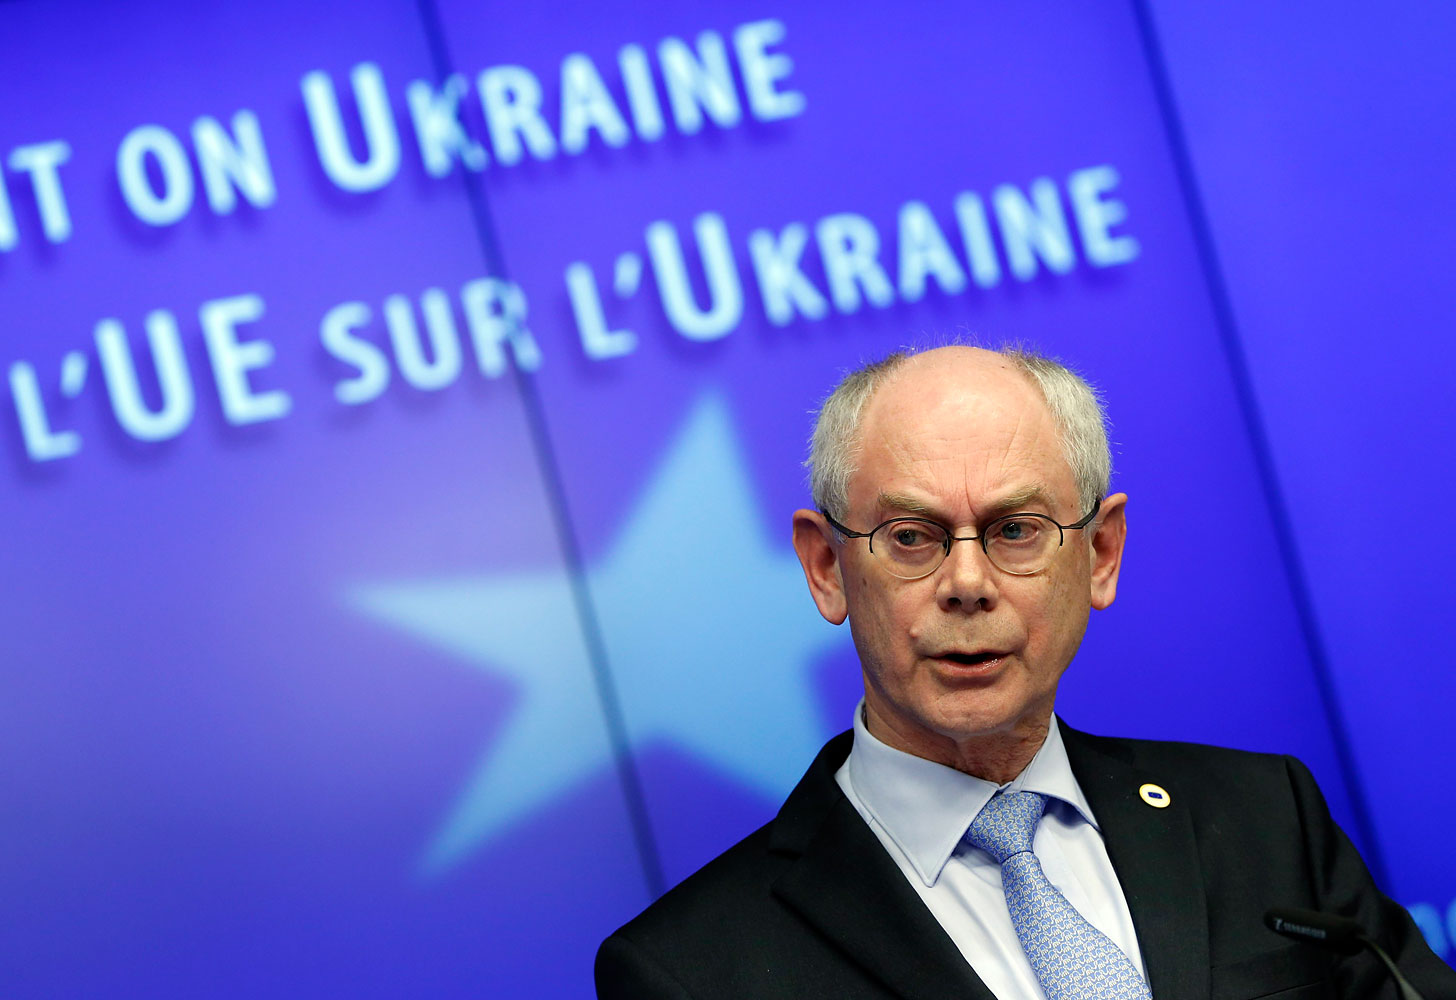 European Council President Herman Van Rompuy speaks at a news conference at the end of a European leaders emergency summit on Ukraine, in Brussels, March 6, 2014.